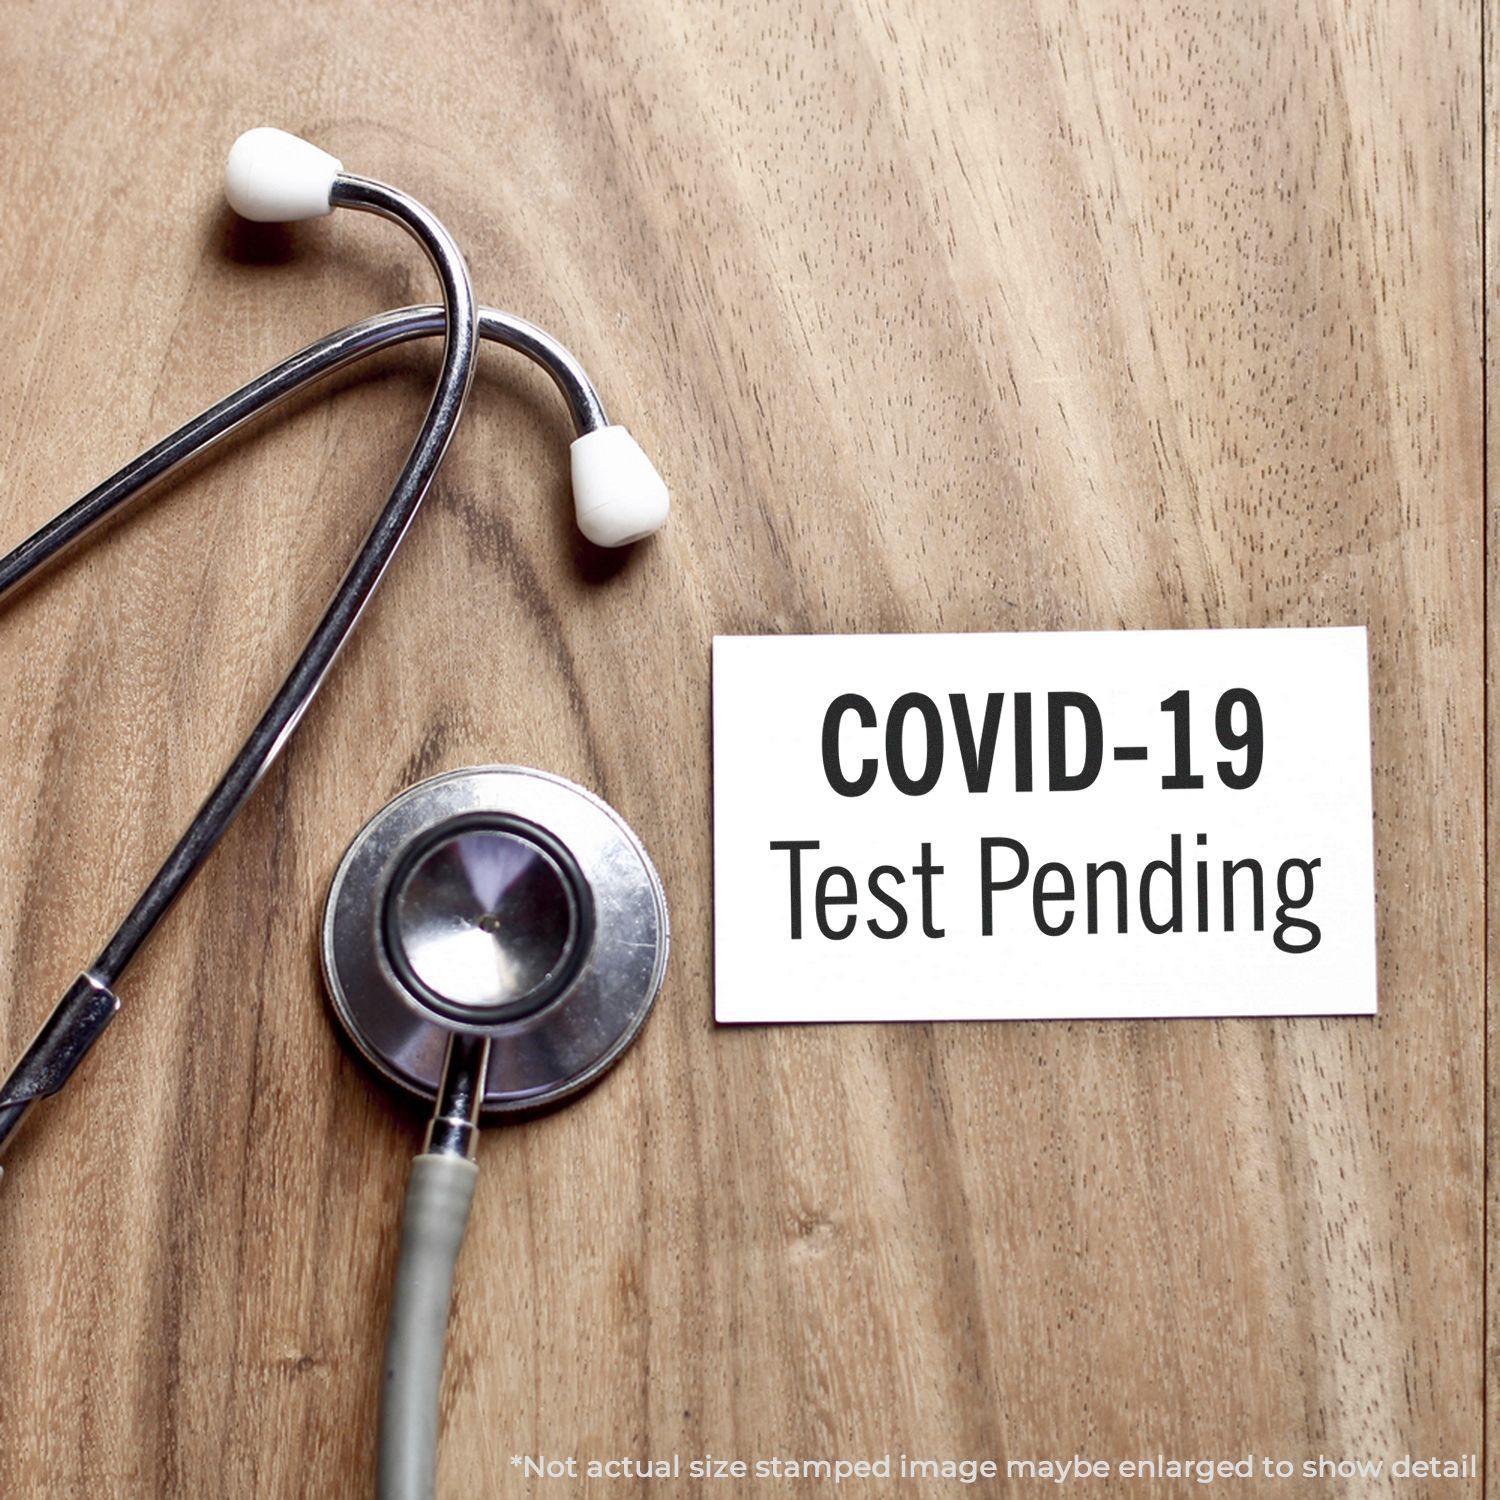 A stock office rubber stamp with a stamped image showing how the text "COVID-19 Test Pending" is displayed after stamping.